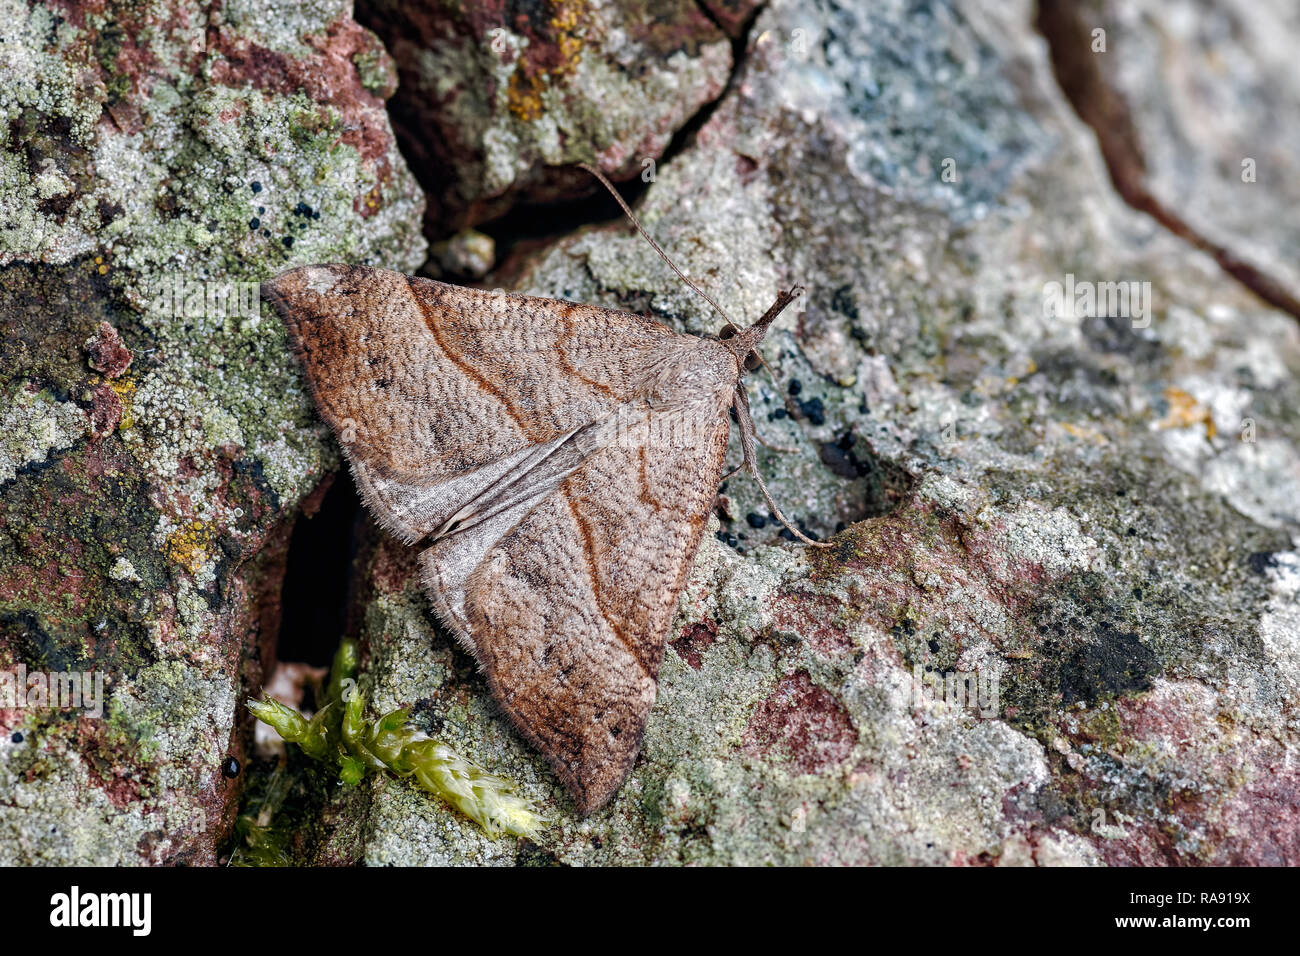 This is the Snout macro moth, Hypena probosdcidalis. It gets its name from the very obvious upturned palps. Here it is partialy camouflaged. Stock Photo